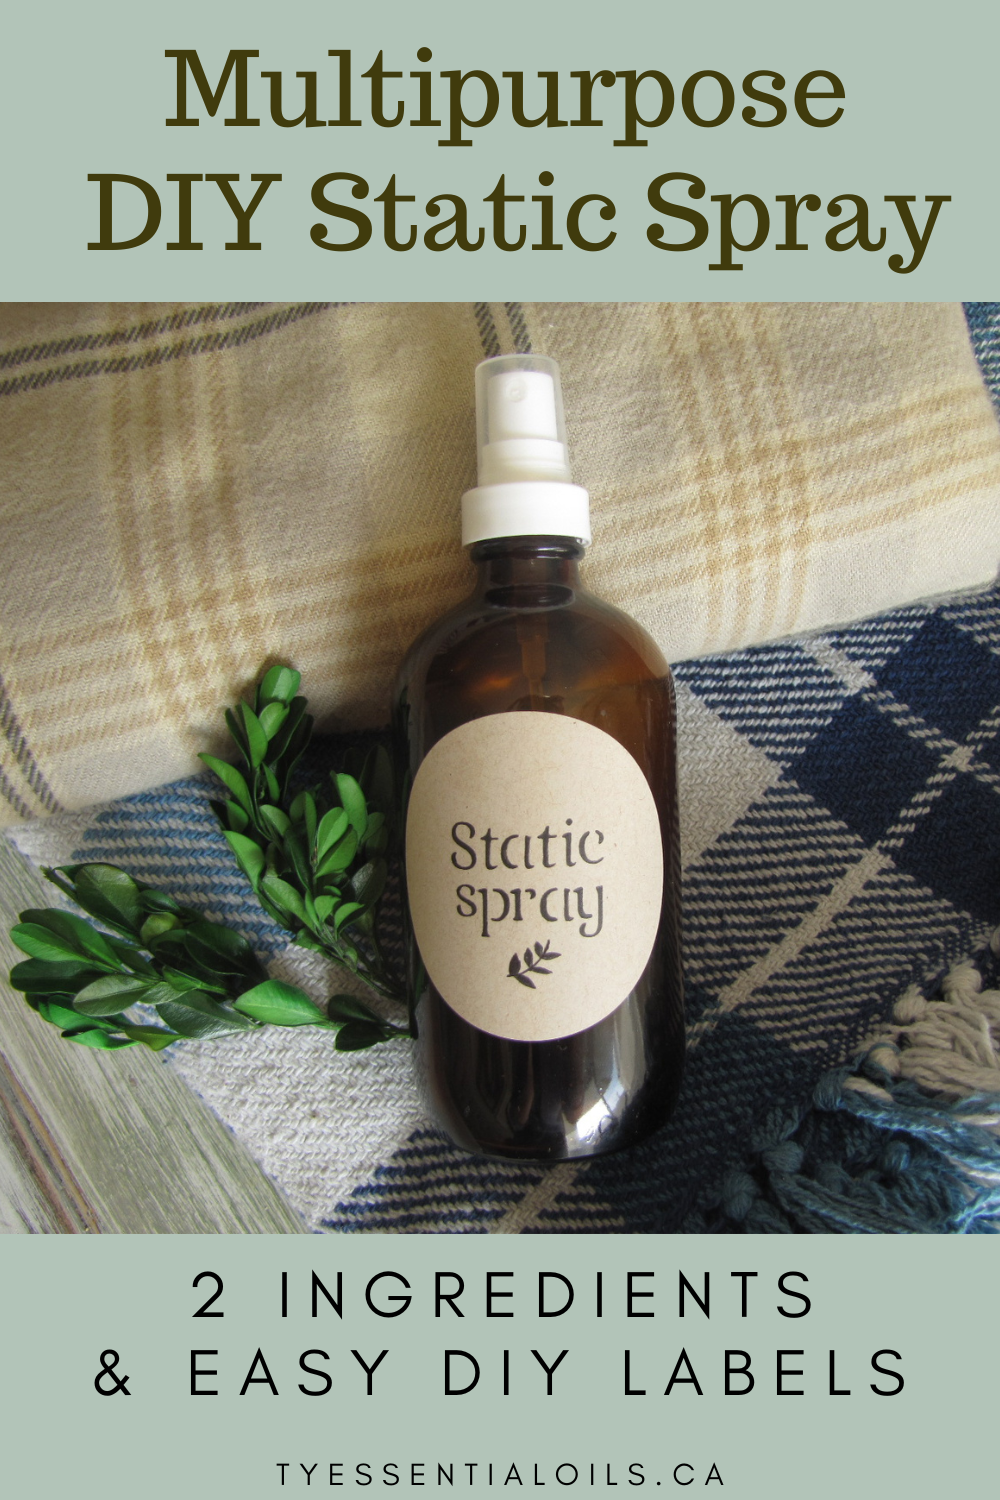 DIY Anti Static Spray and Getting Rid of Static Cling - Suburbia Unwrapped